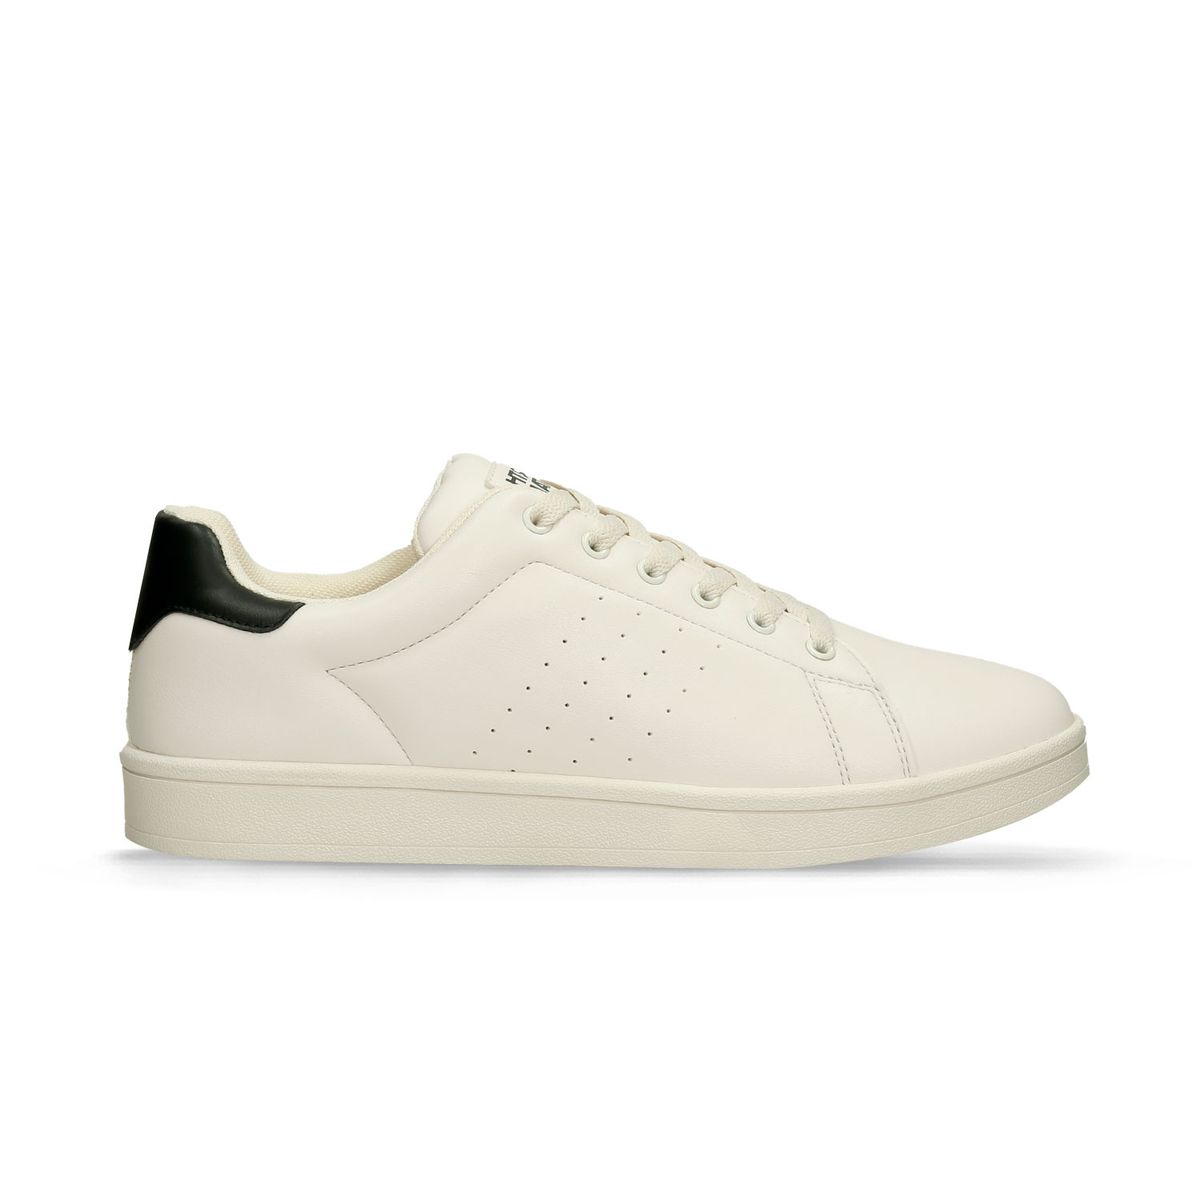 Tenis Casuales Beige North Star Jenner Compus Hombre